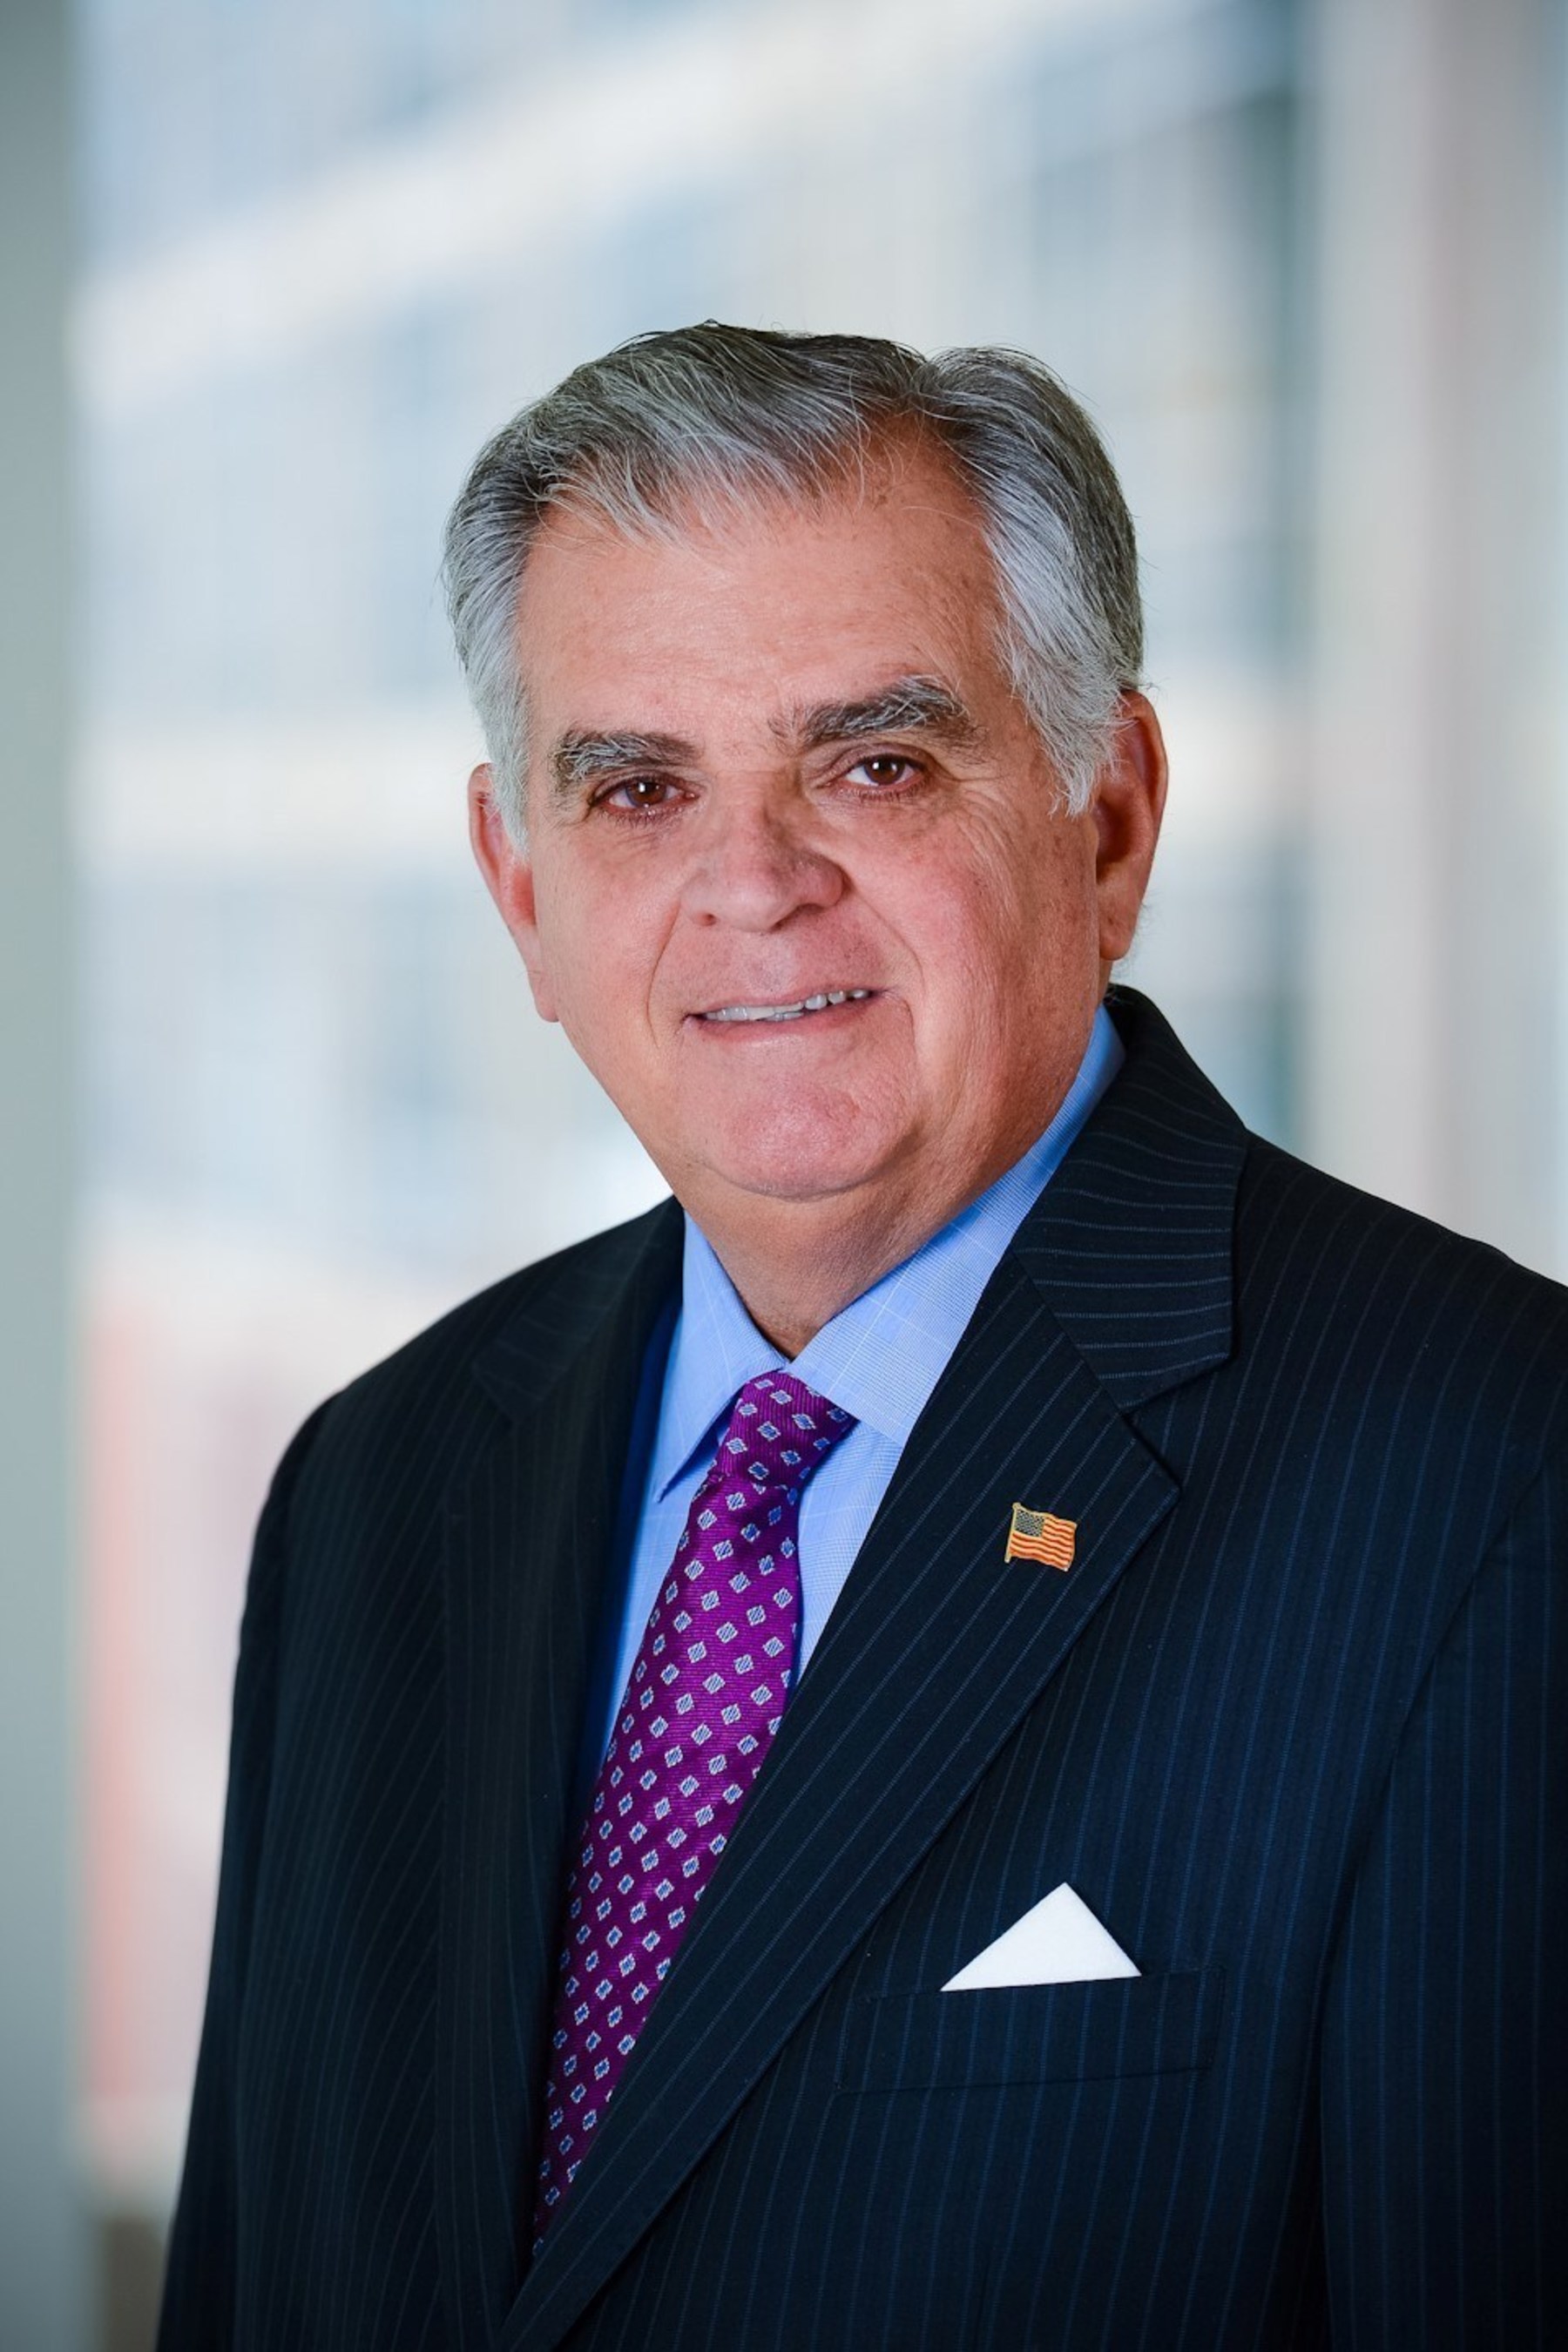 Former Transportation Secretary Ray LaHood has joined the board of the Lincoln Institute of Land Policy.